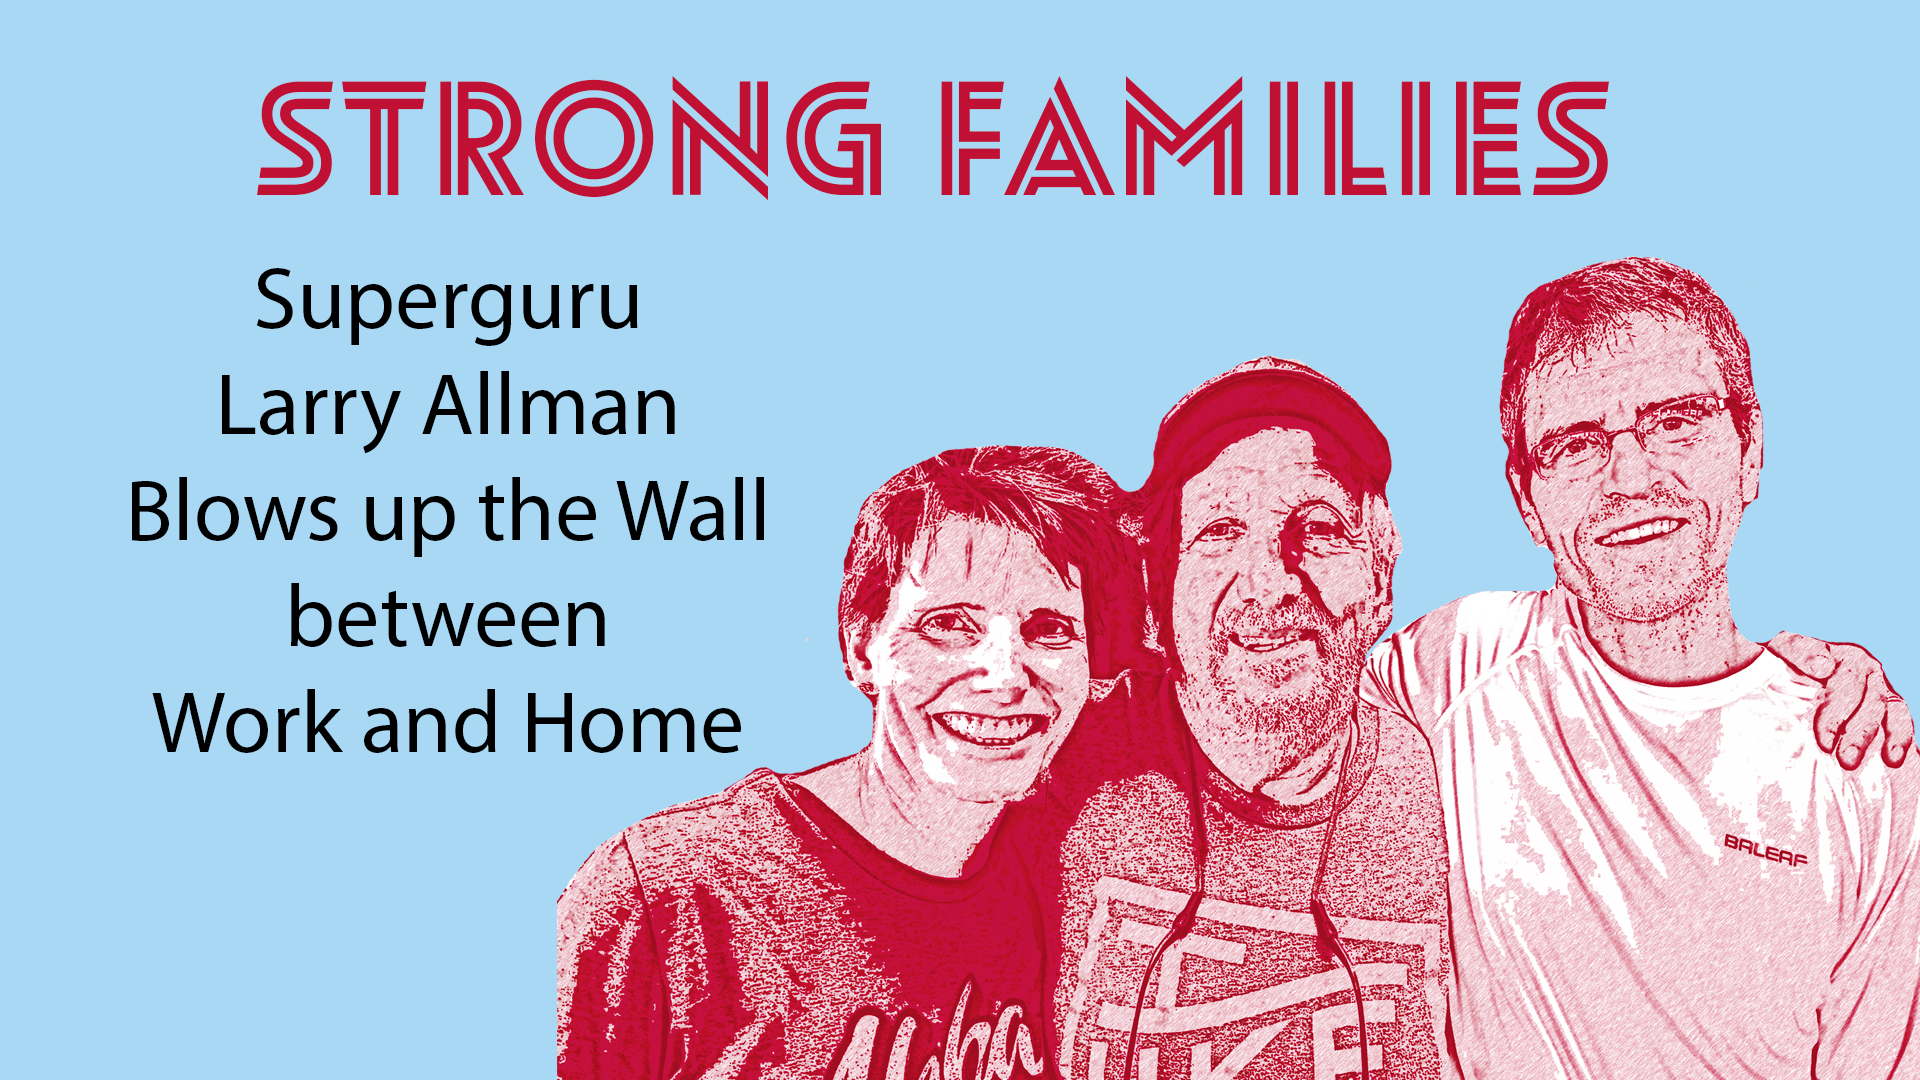 Strong Families: Superguru Larry Allman Blows up the Wall between Work and Home